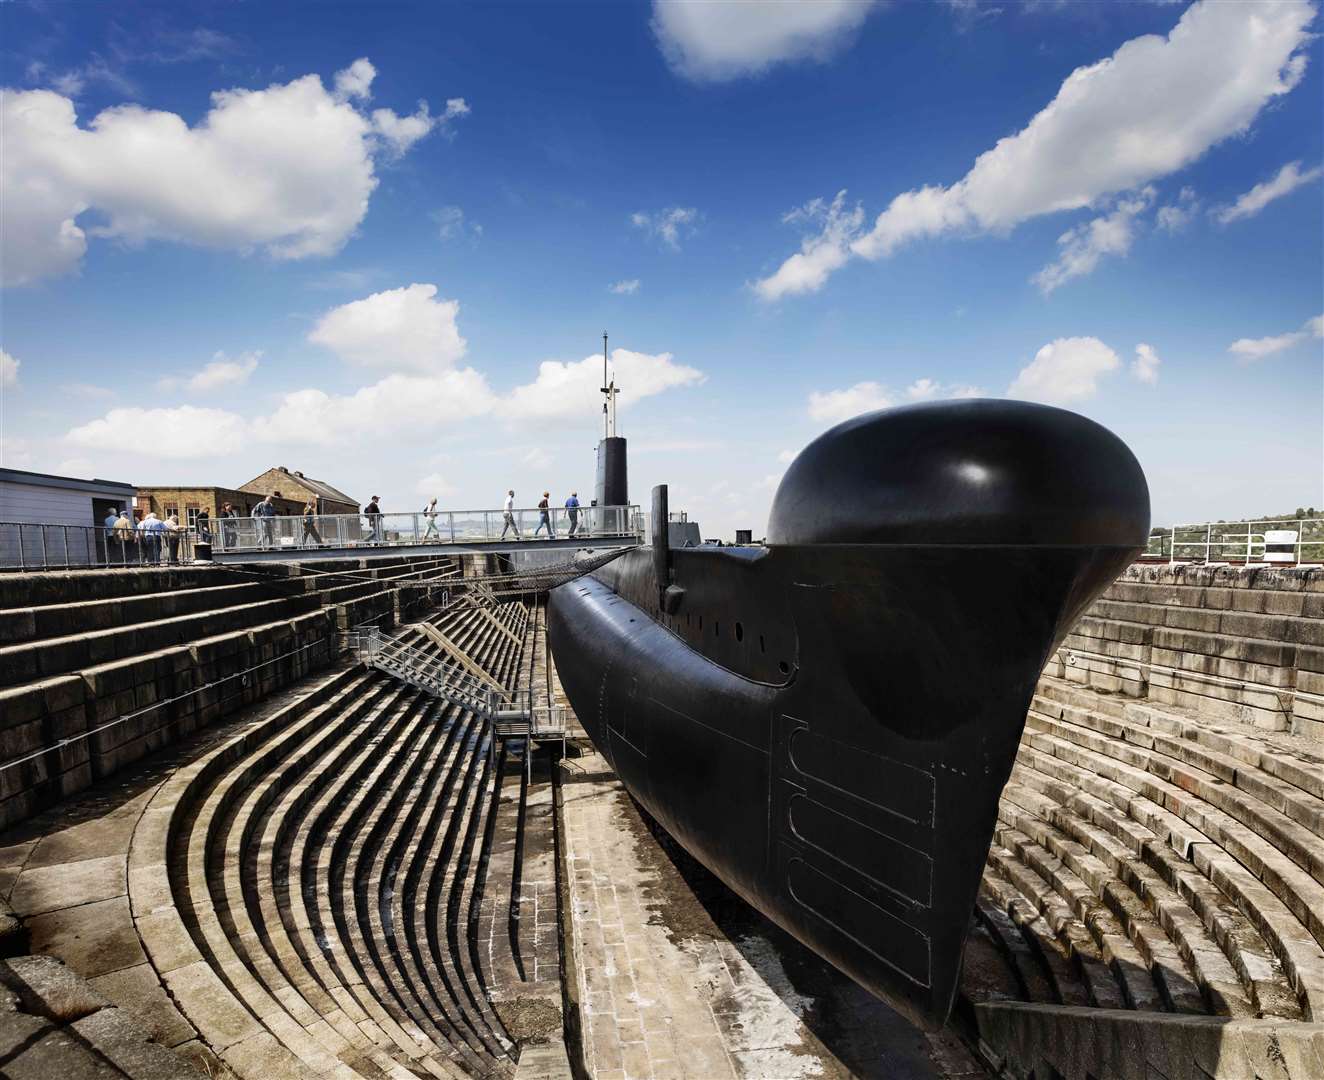 HMS Ocelot is now in the one of the dry docks at The Historic Dockyard